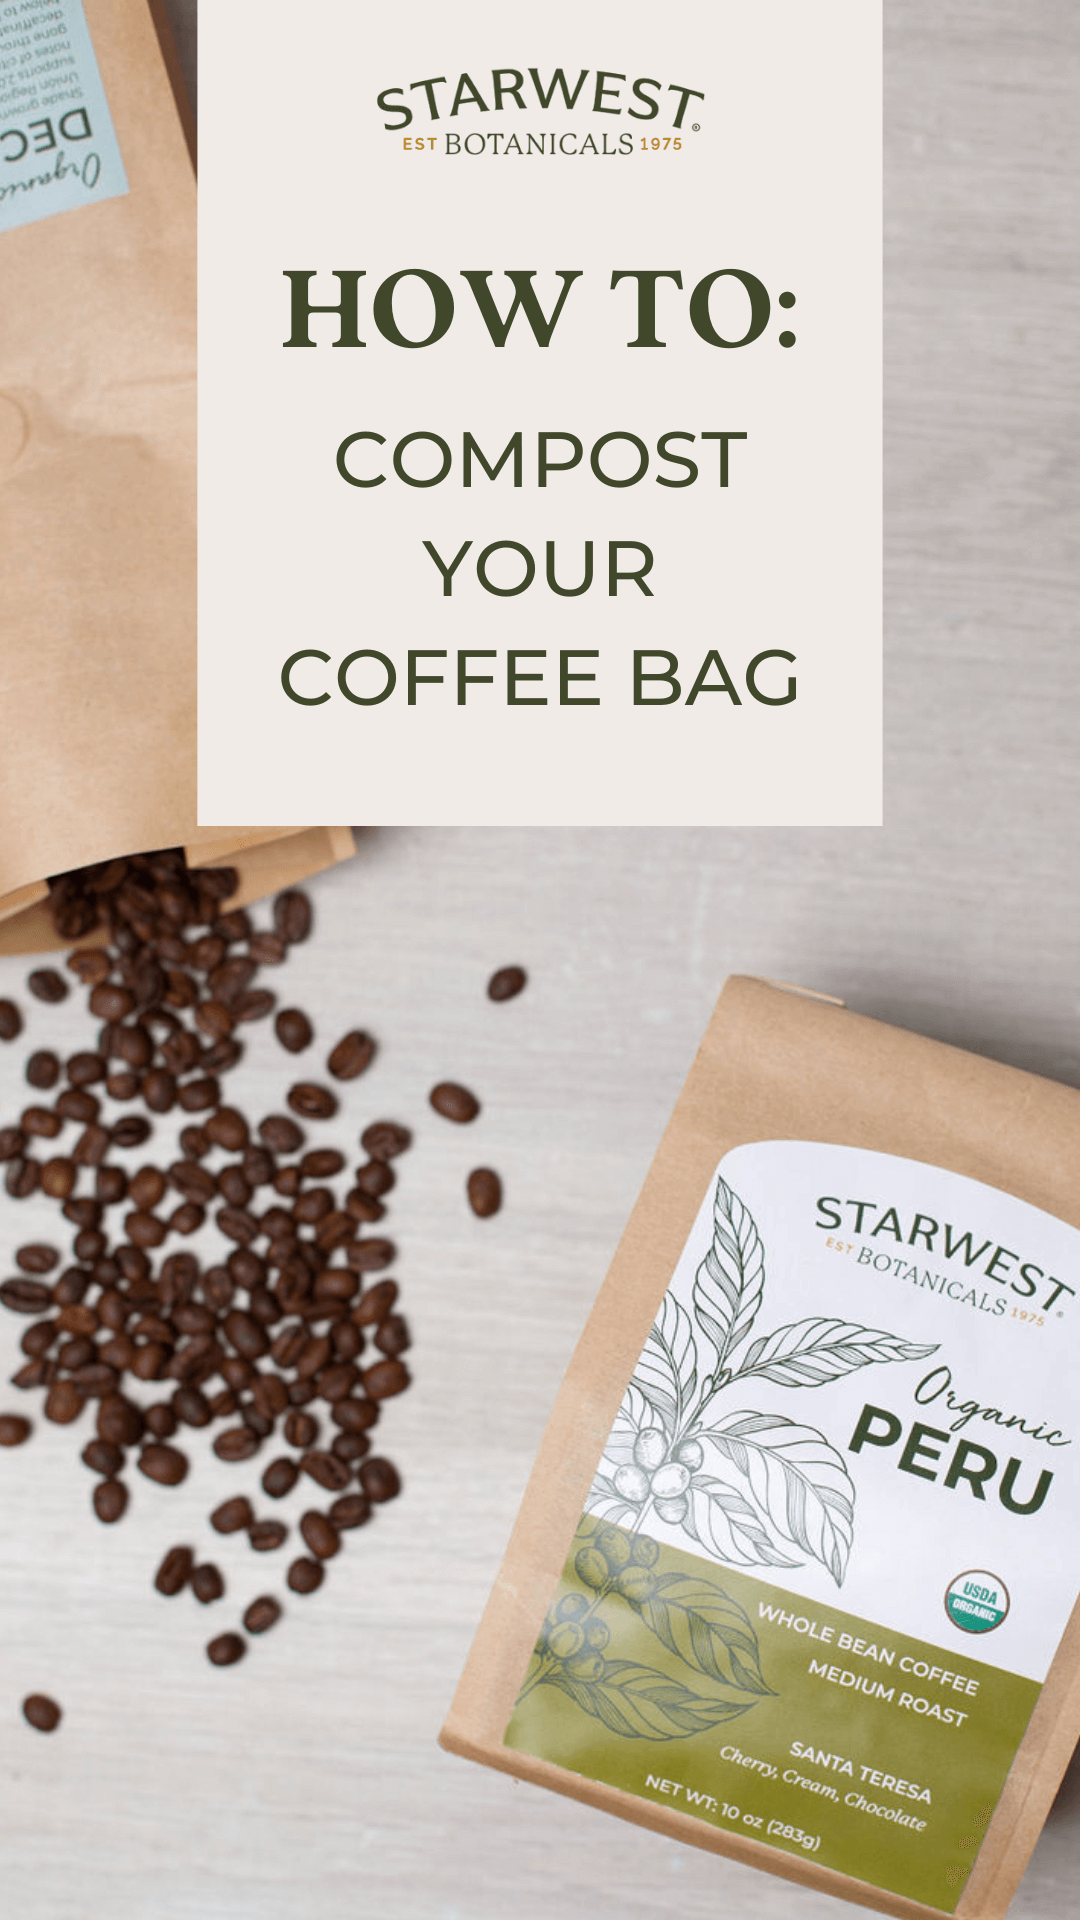 How to compost your Starwest Organic Coffee Bag